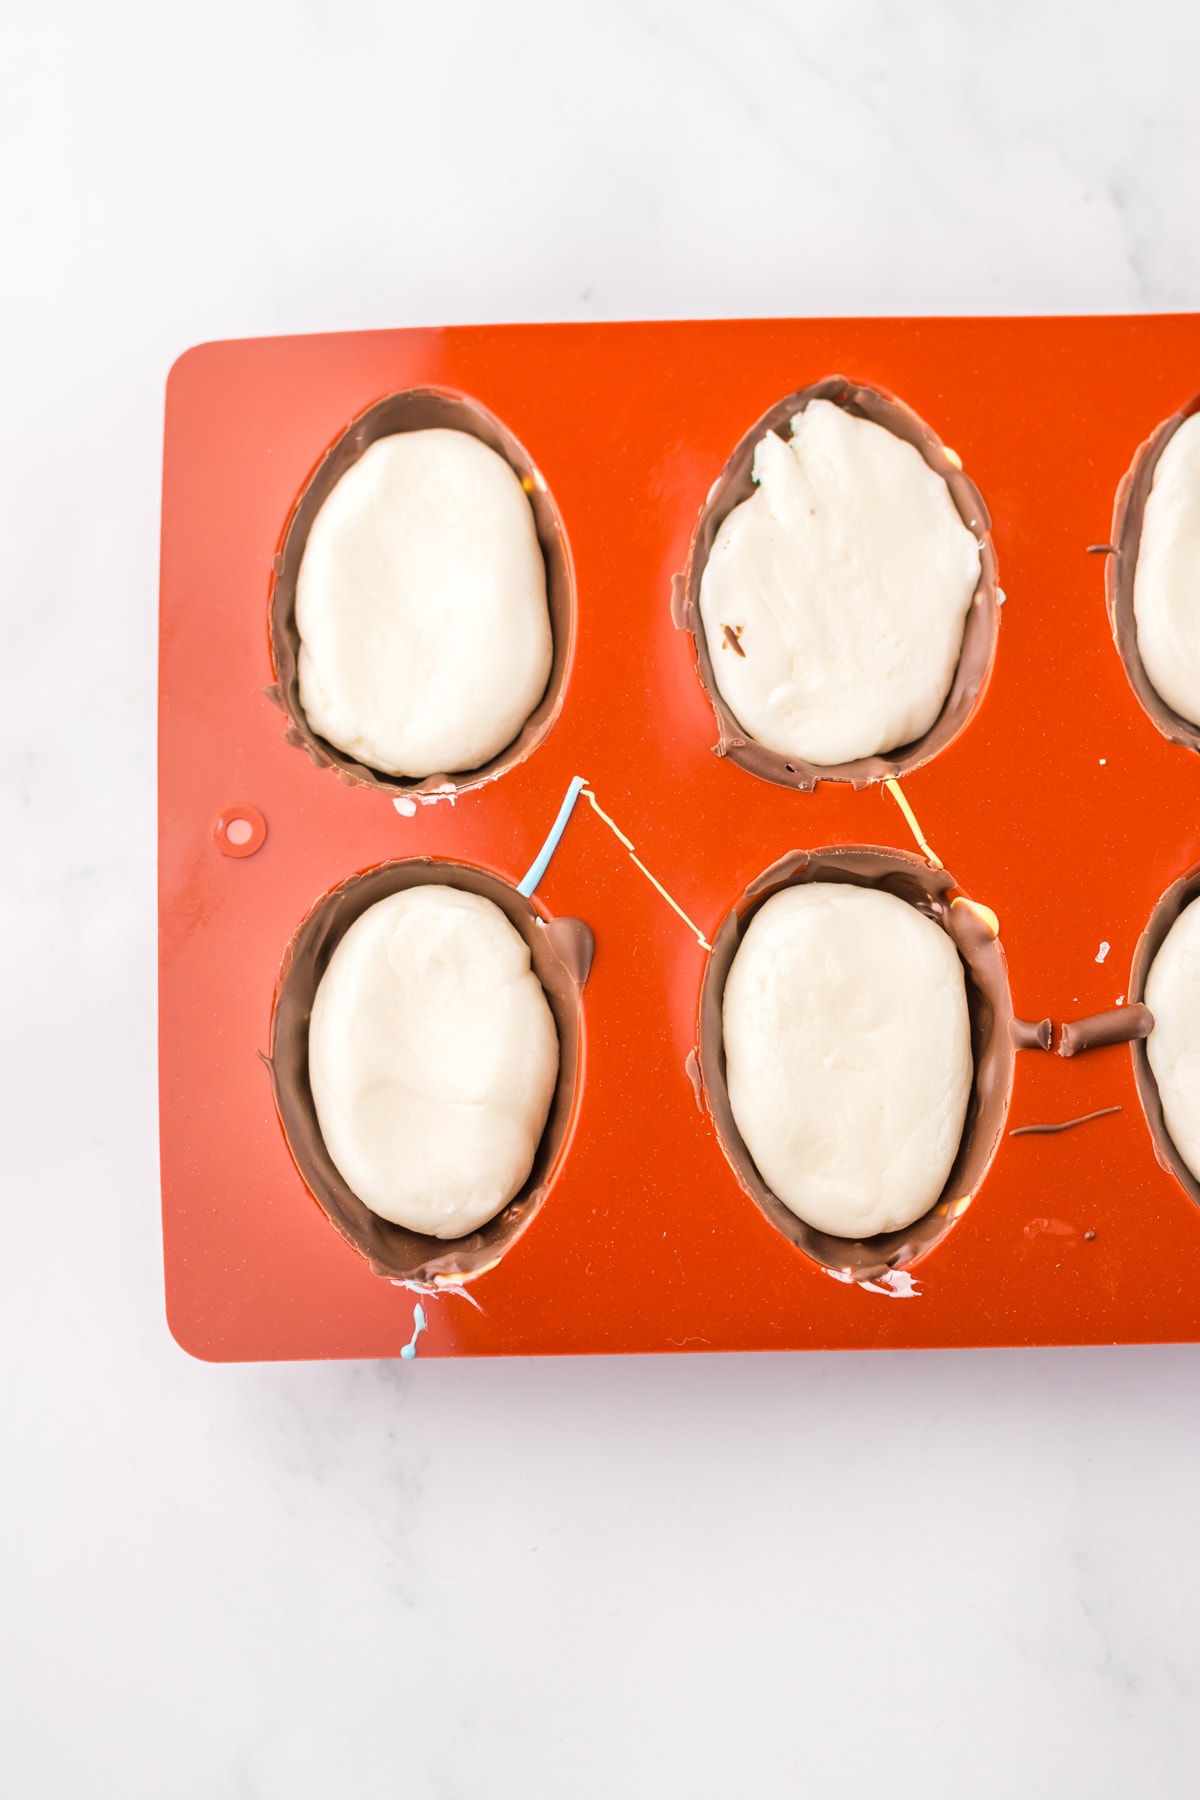 marshmallow eggs filled in egg shaped silicone mold